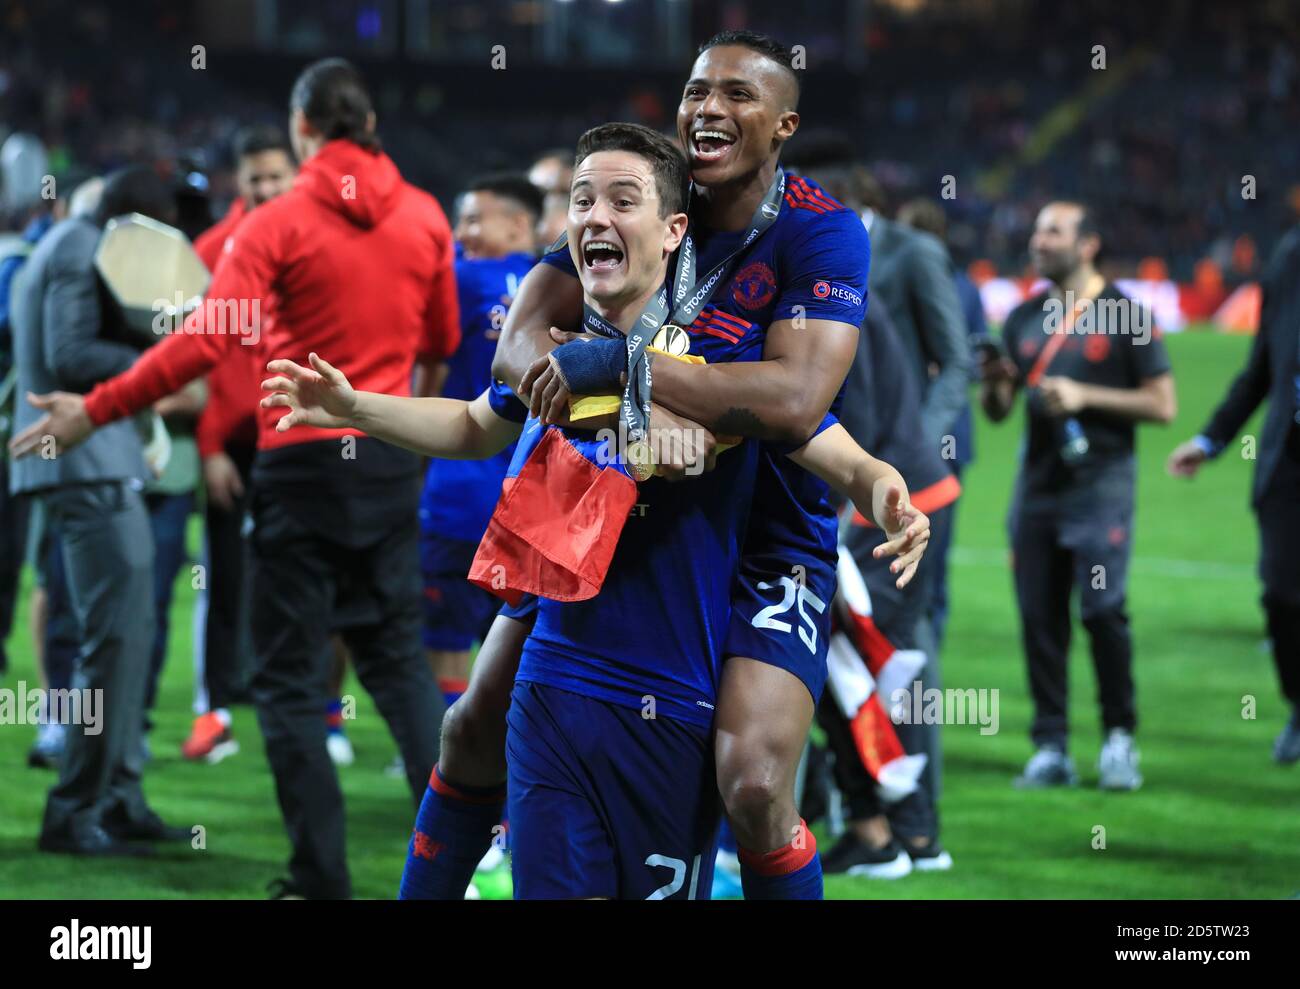 Manchester United's Ander Herrera and Manchester United's Luis Antonio Valencia celebrate after winning the UEFA Europa League Final in Stockholm Stock Photo